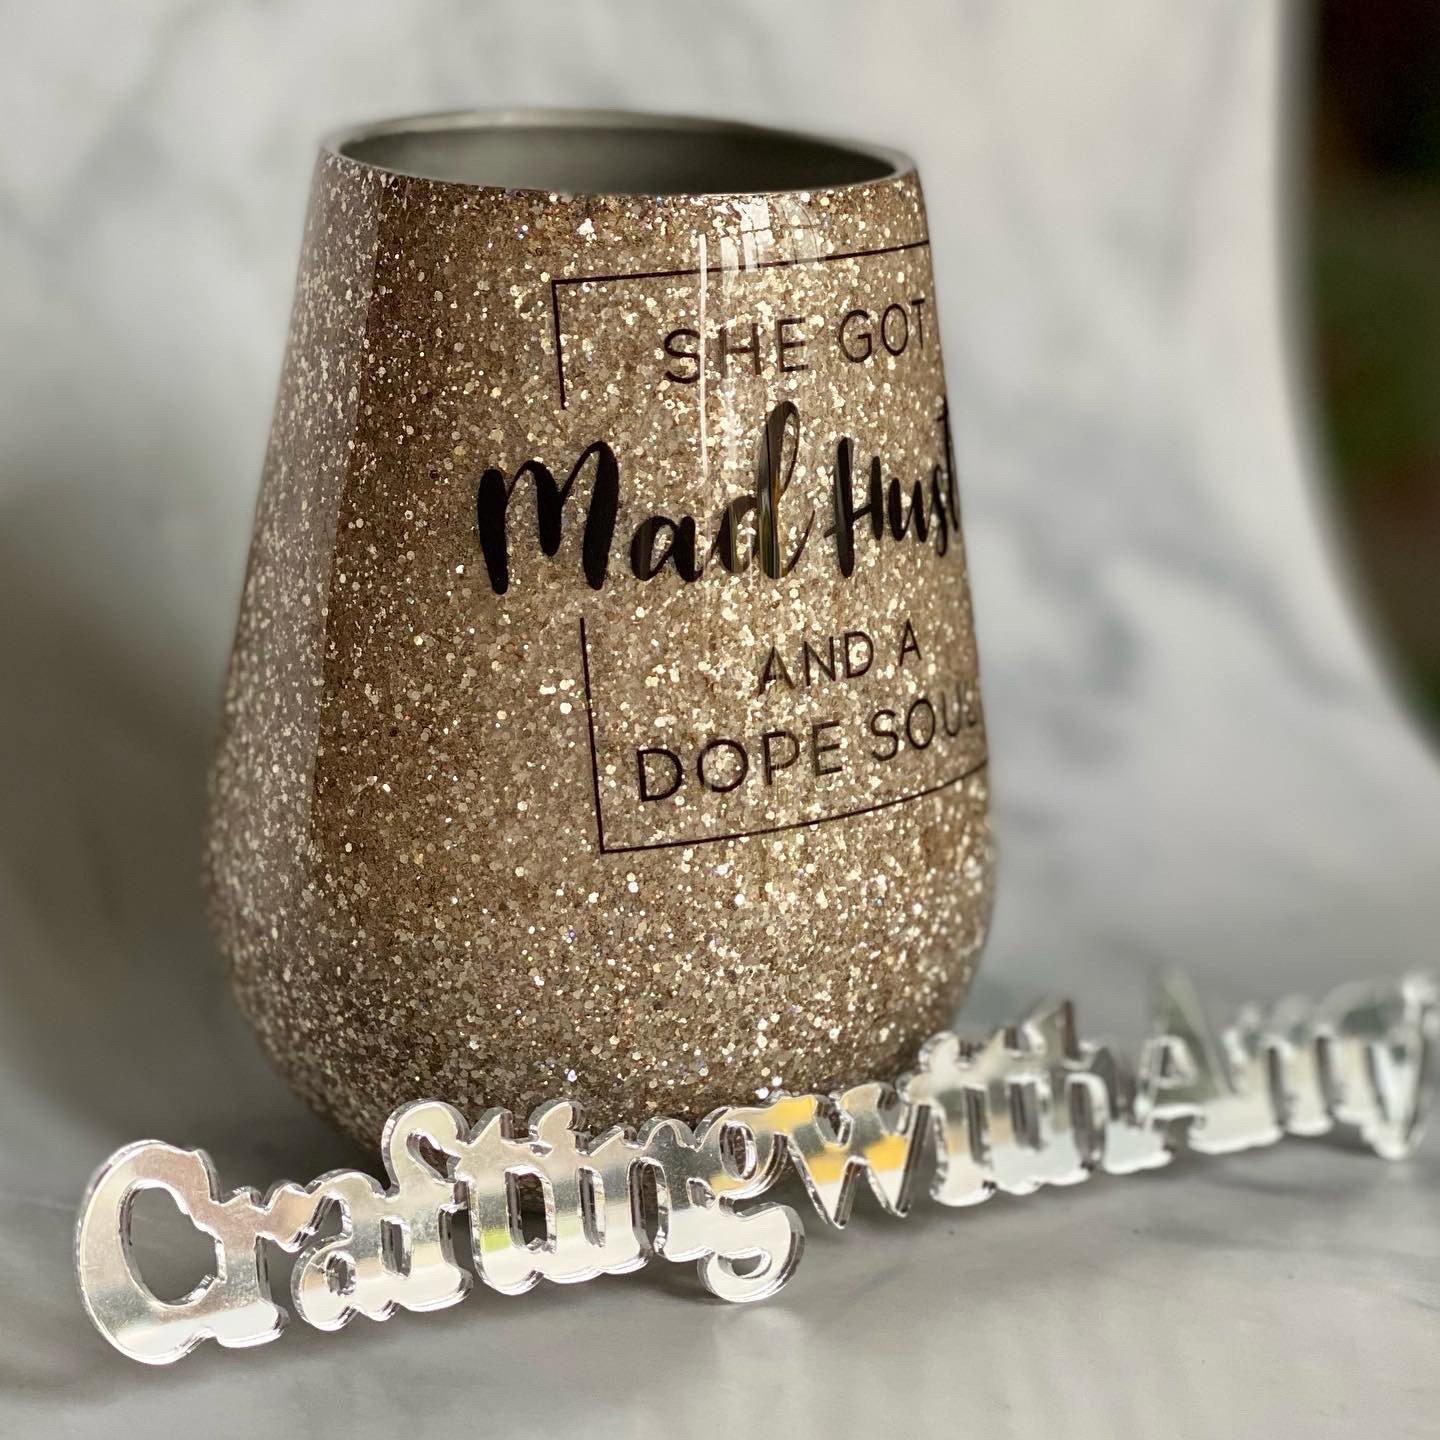 Mad Hustle and a Dope Soul - wine - wine tumbler- epoxy - glitter - wine epoxy tumbler - She Got mad hustle and a Dope Soul freeshipping - CraftingwithAmy